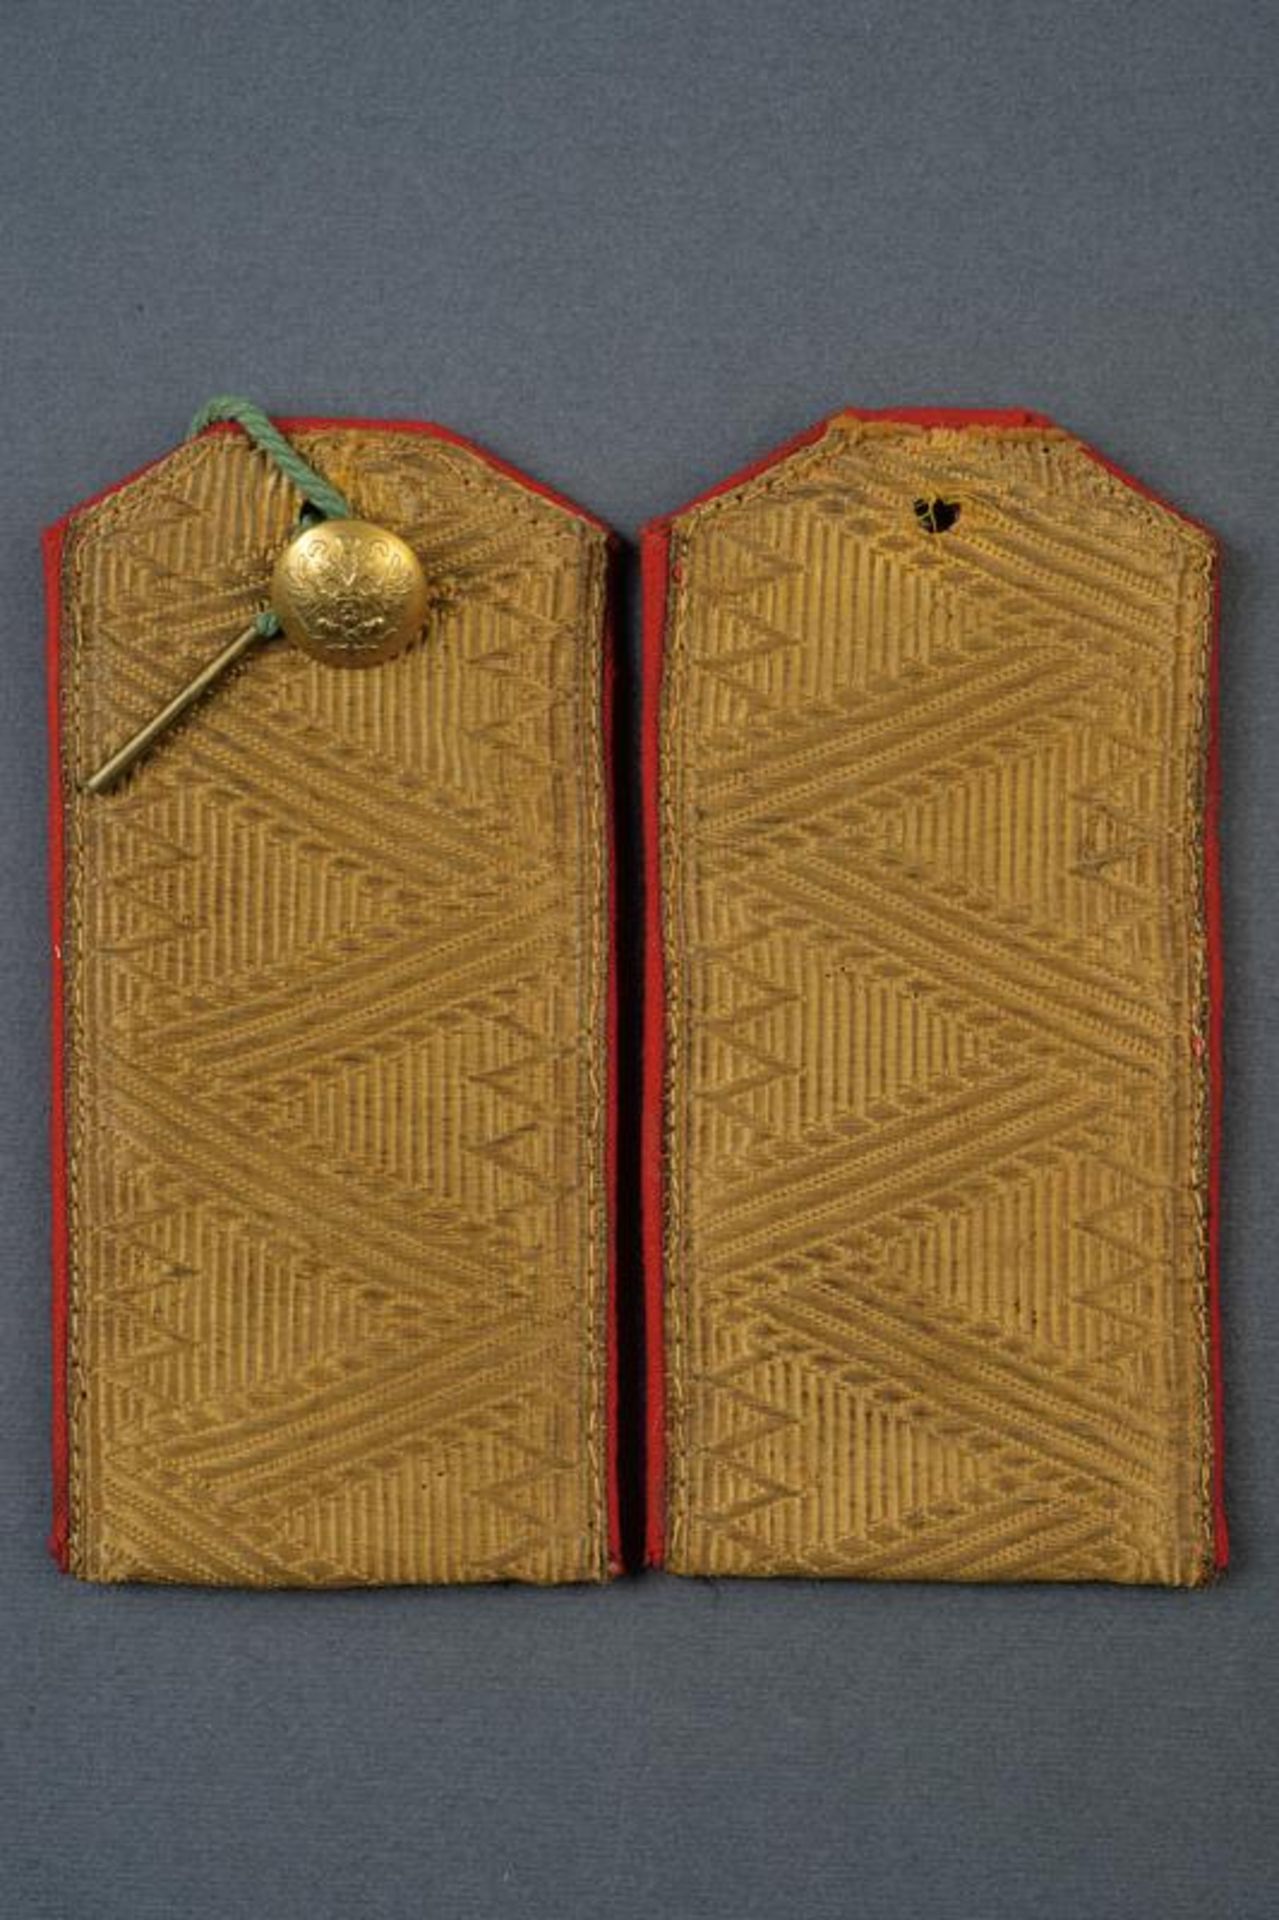 A pair of shoulder boards